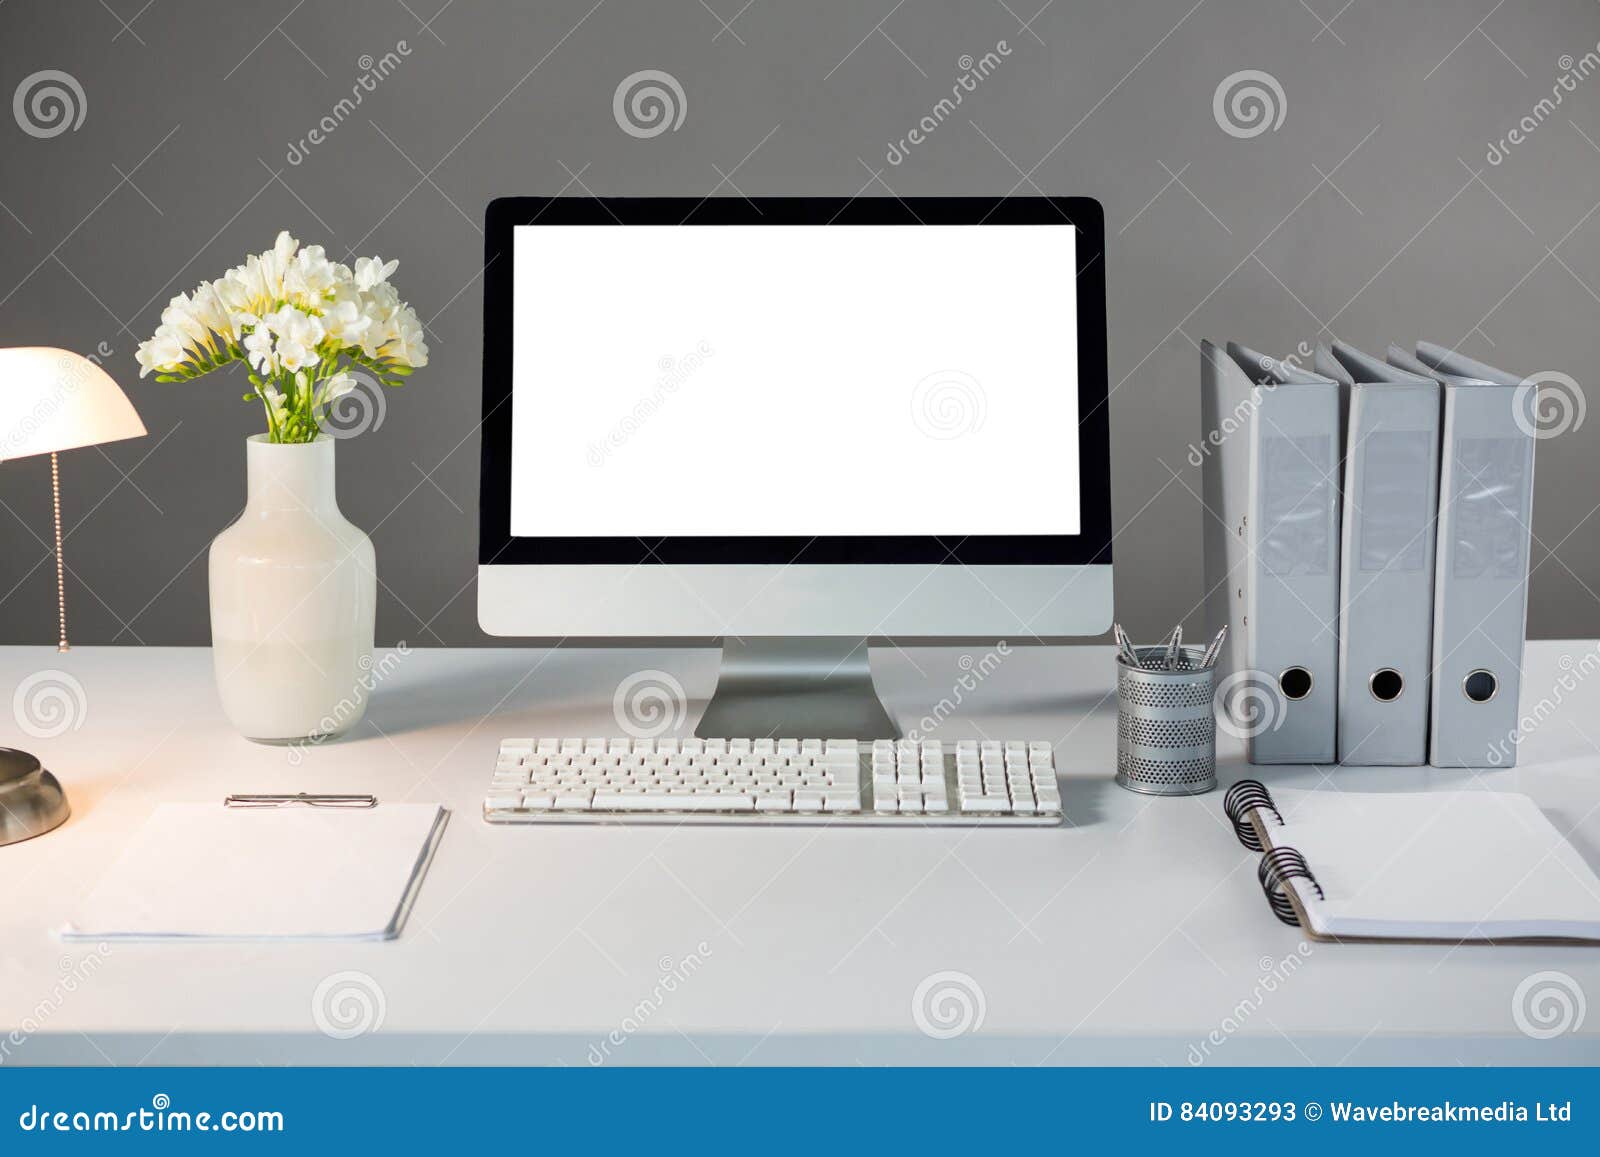 desktop pc with flower vase and files